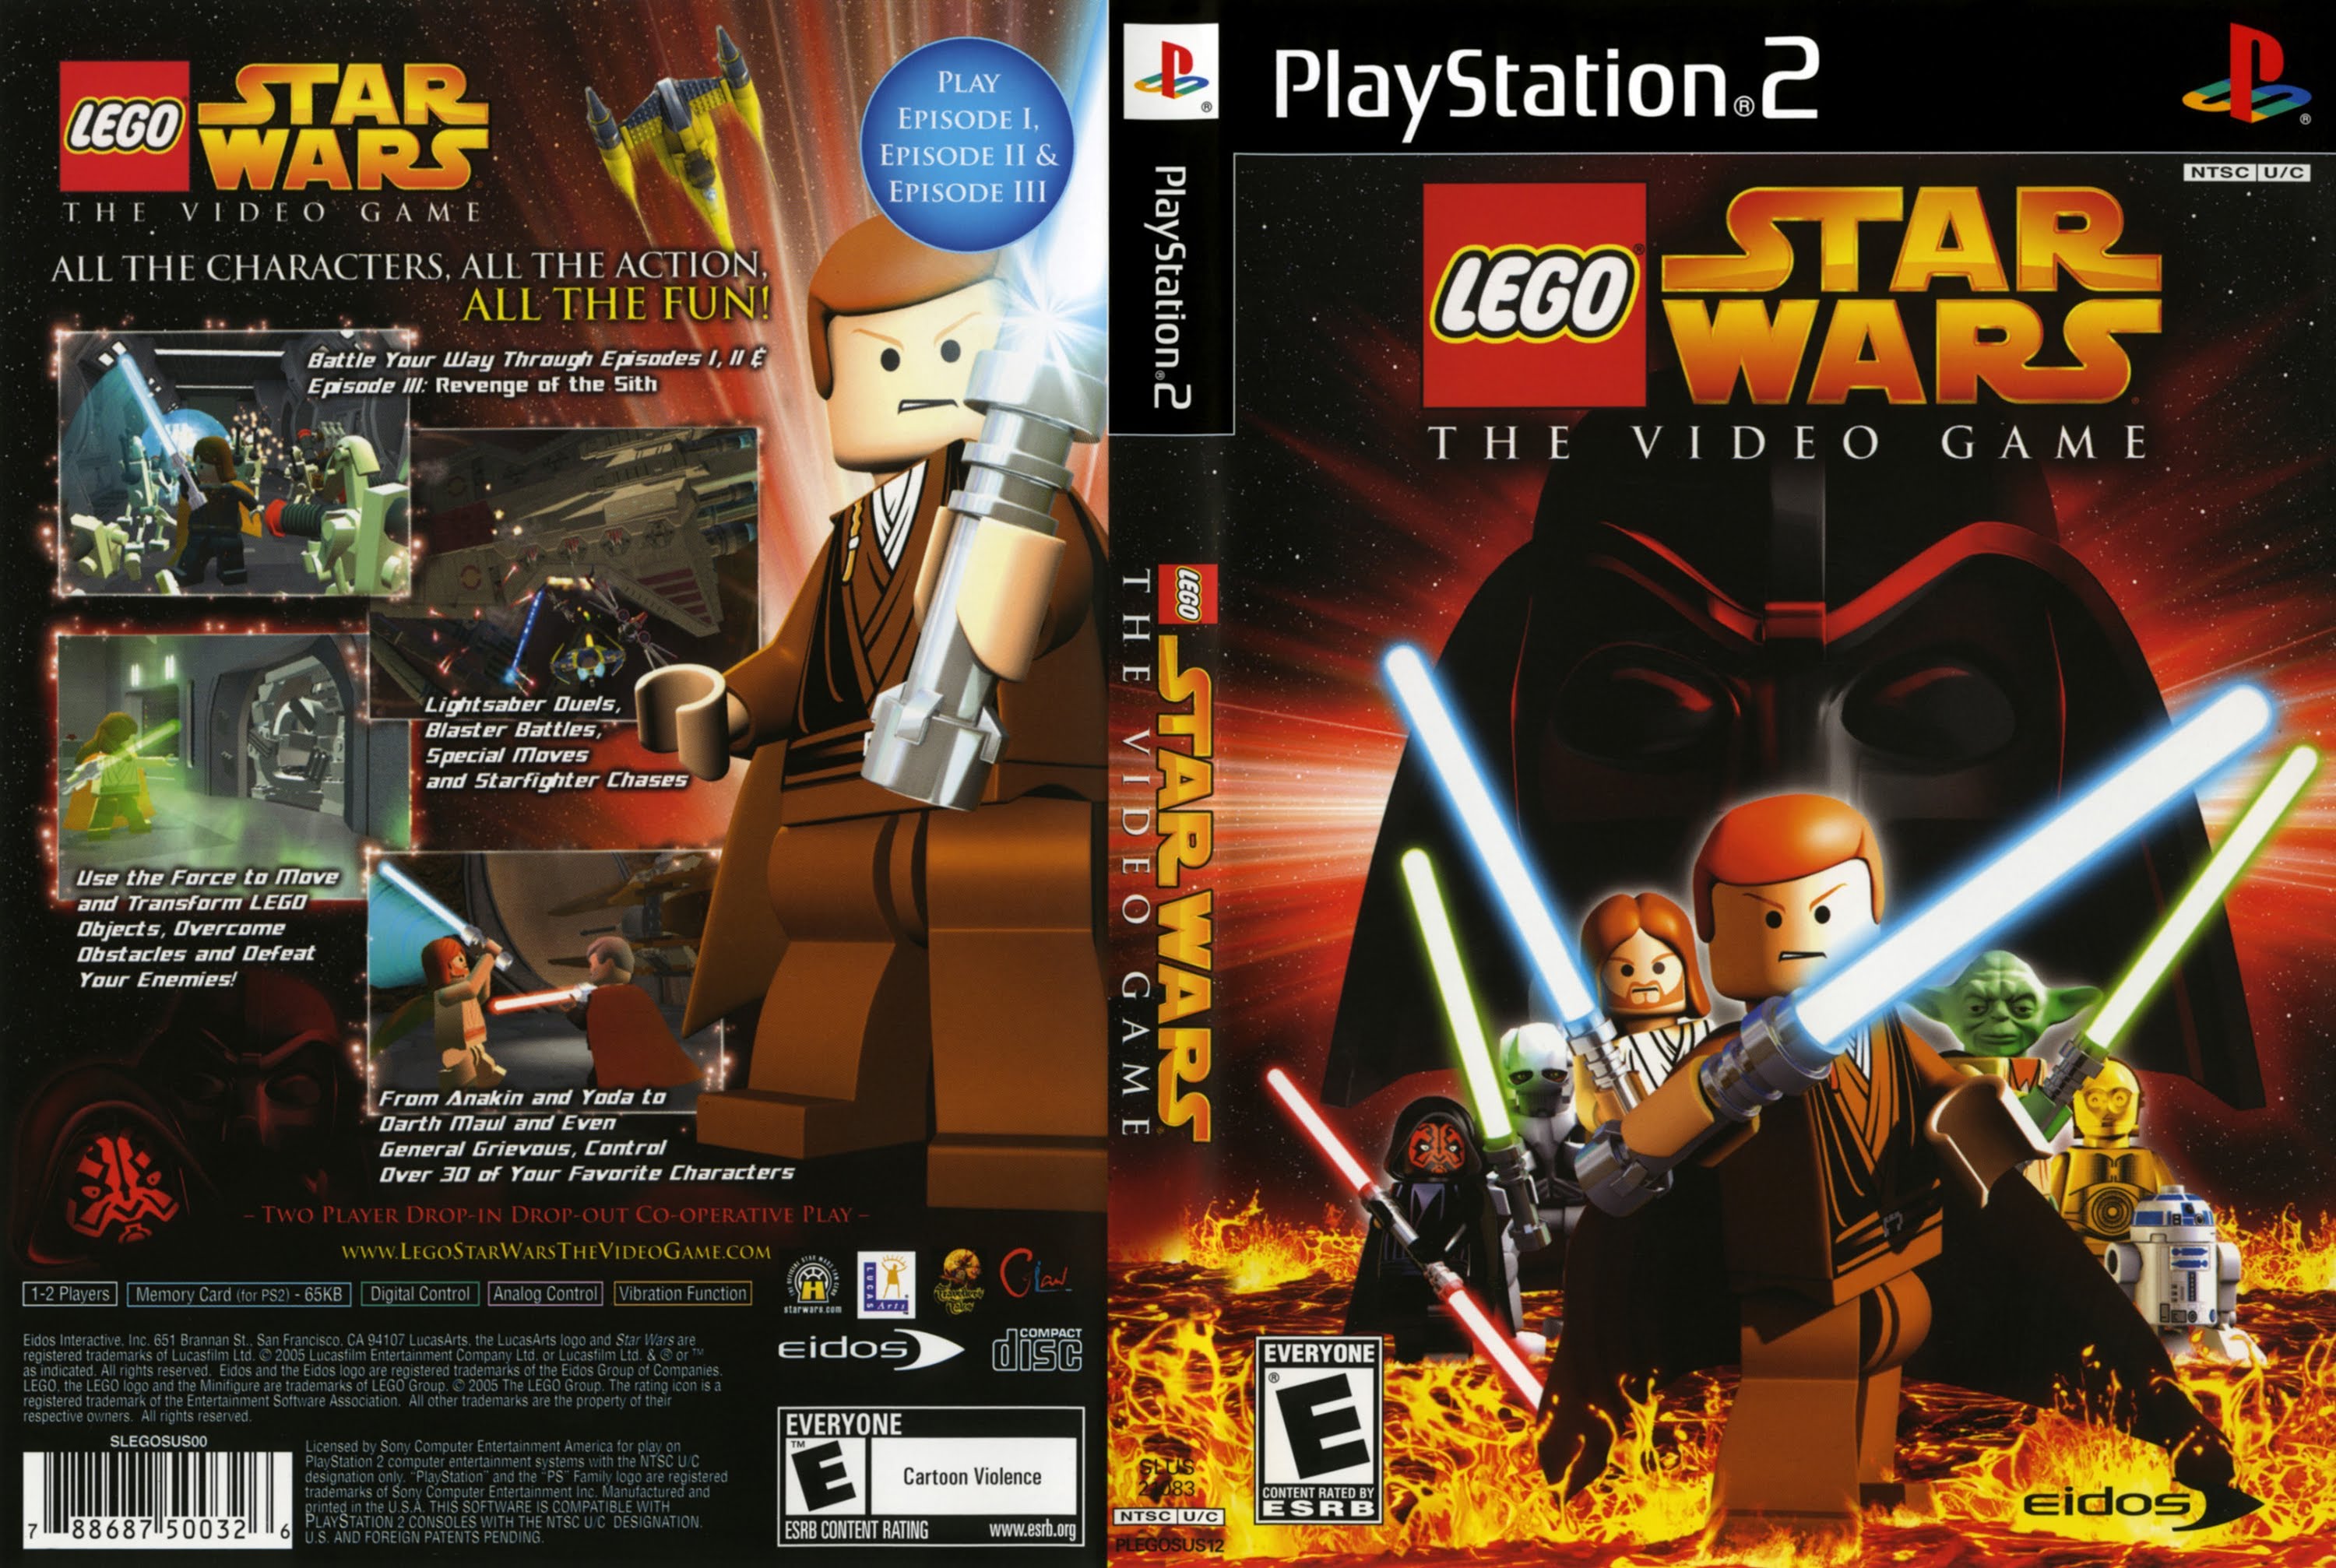 download lego star wars ps5 for free